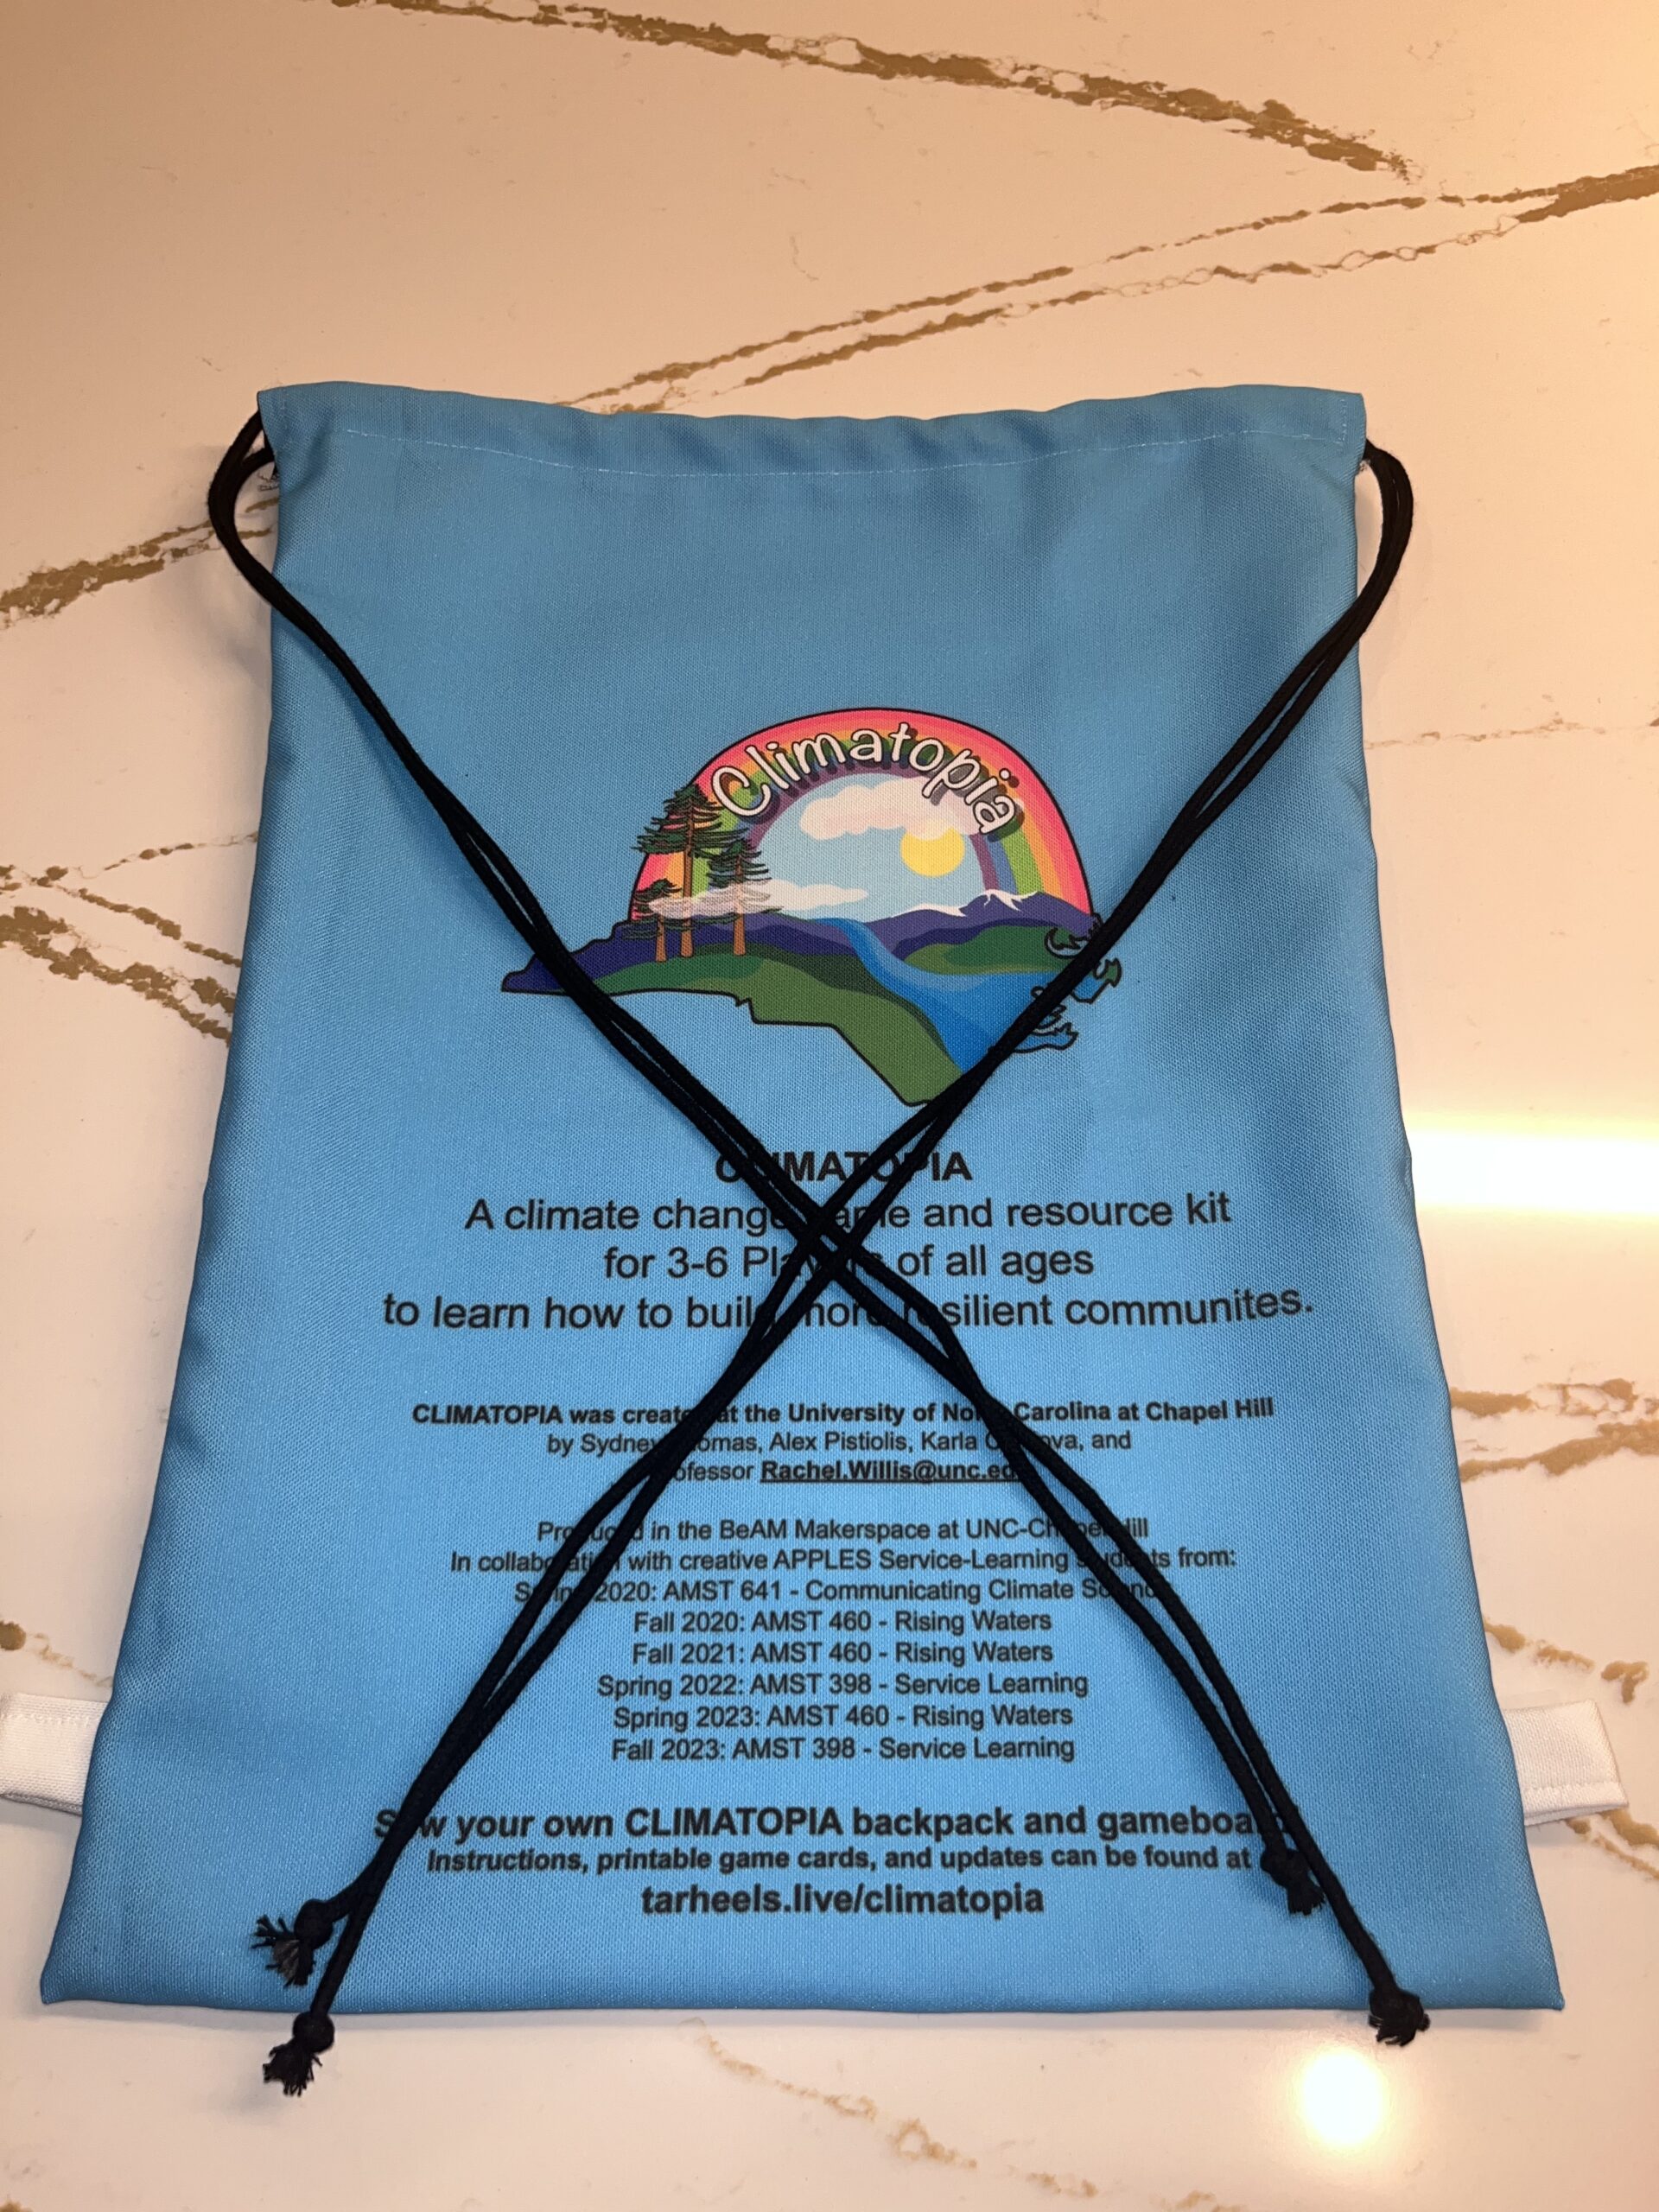 Climatopia drawstring bag with the cords in an x over the bag